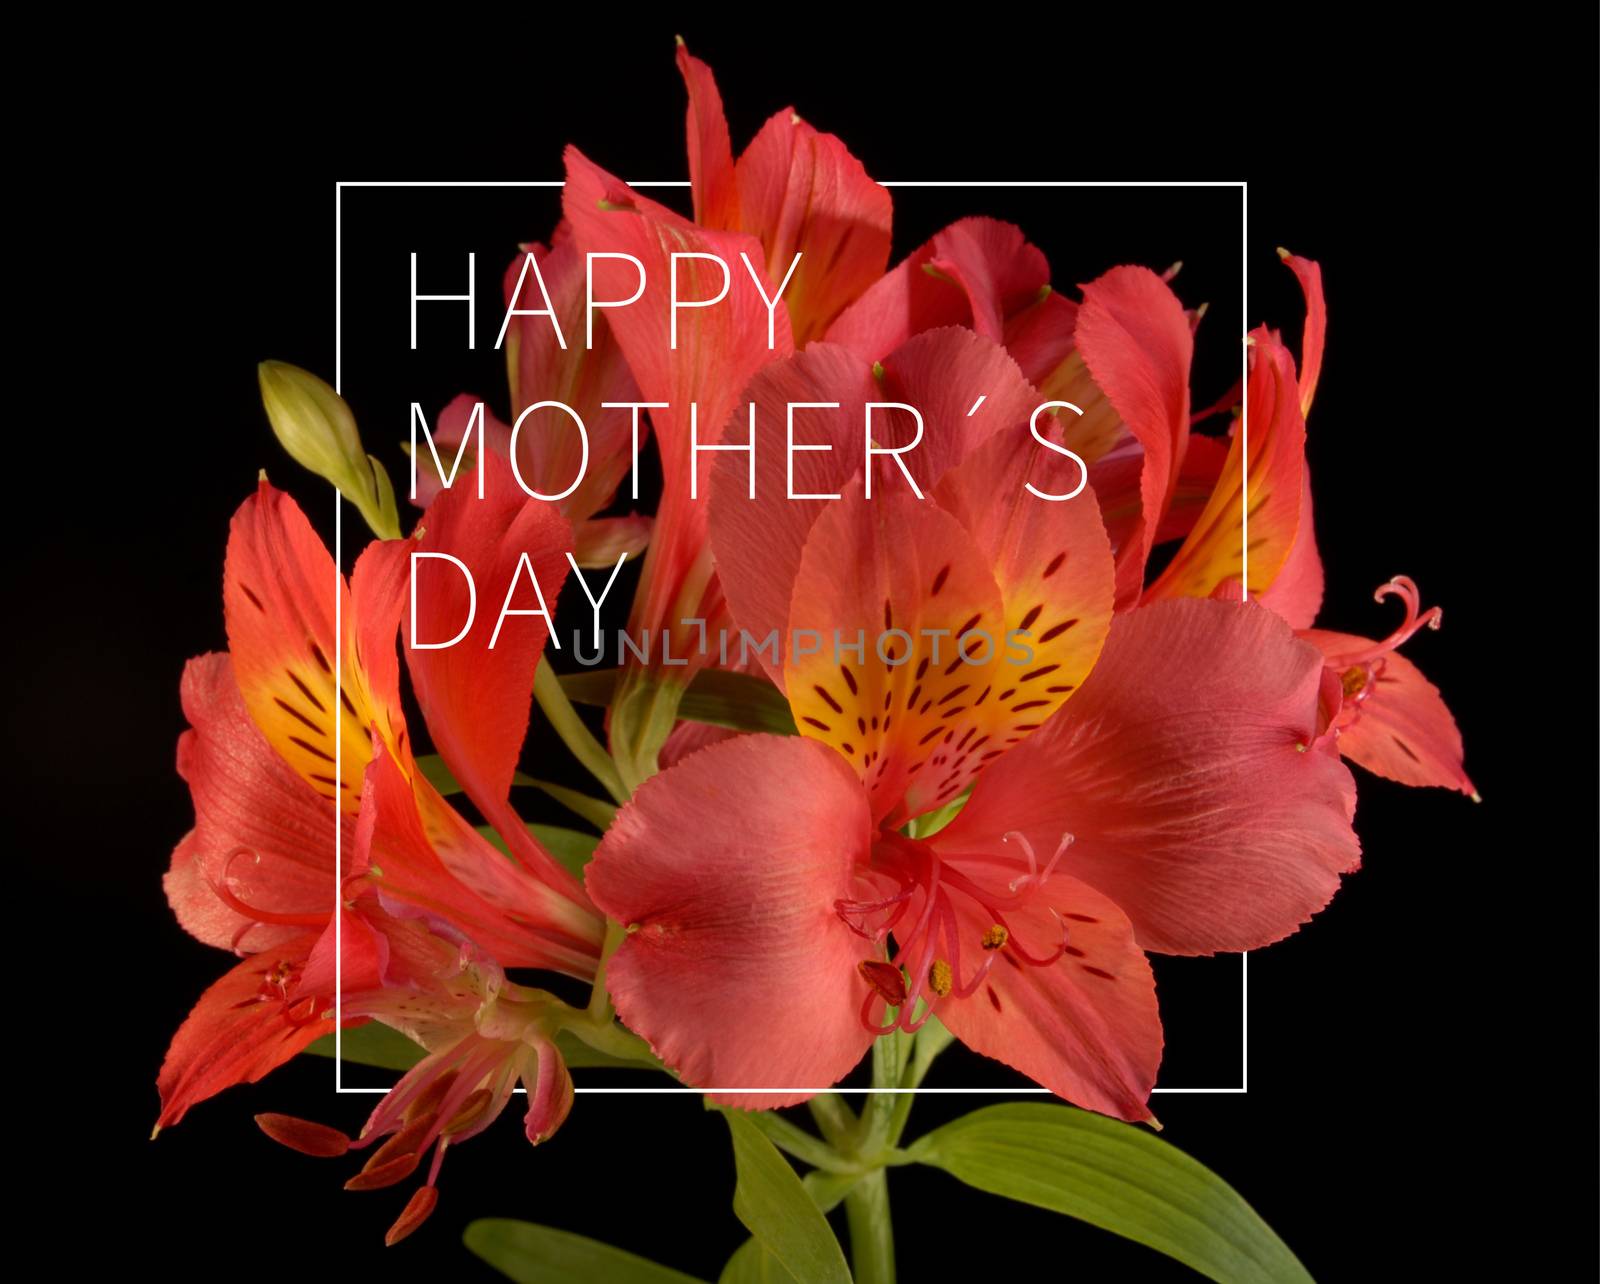 Happy Mothers day flower background by cienpies